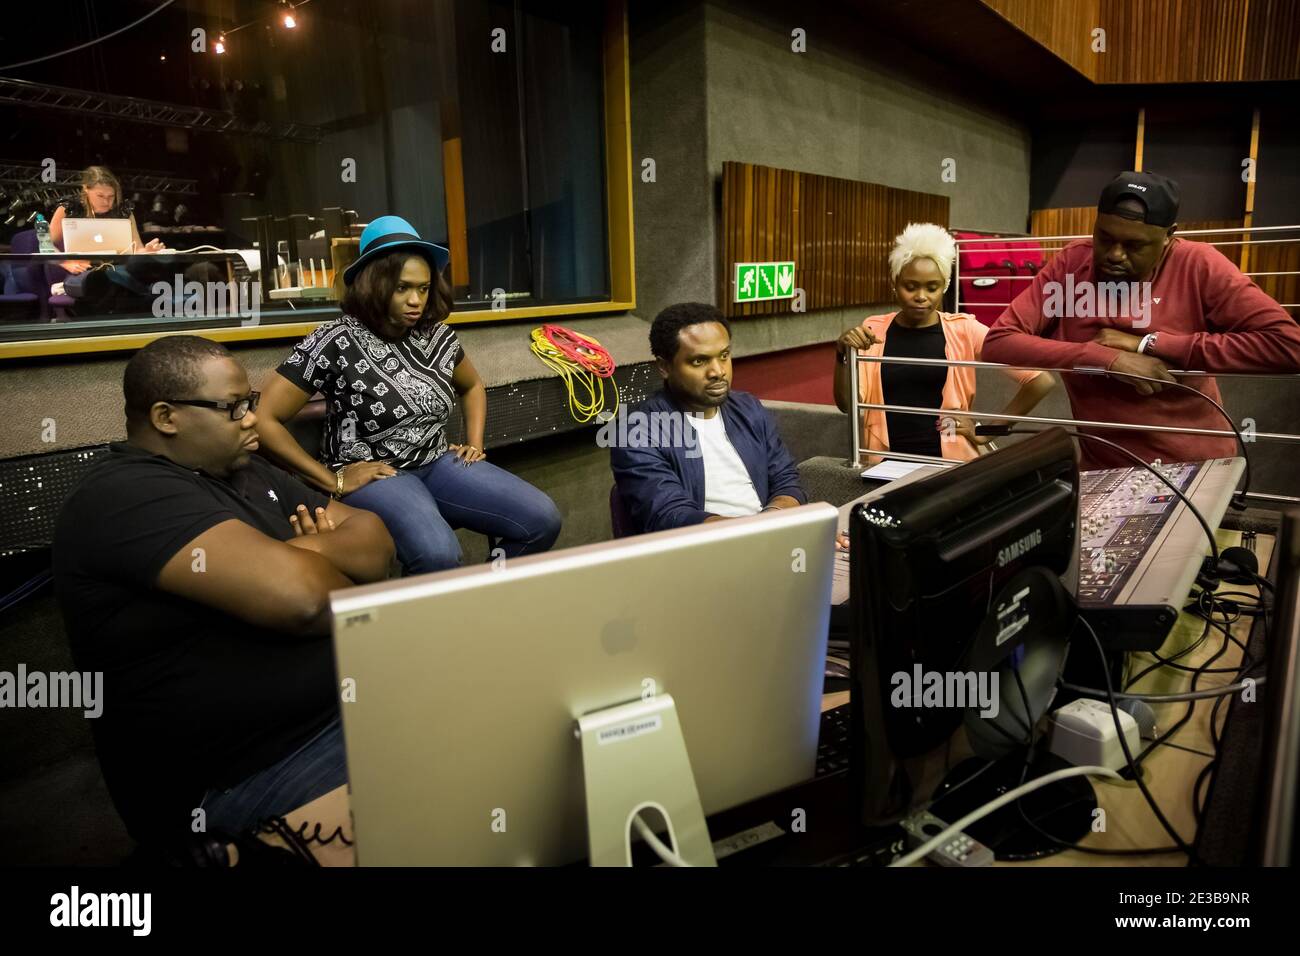 Johannesburg, South Africa - April 28, 2015: Nigerian Music producer Cobhams Asuquo working in studio with African artists Stock Photo